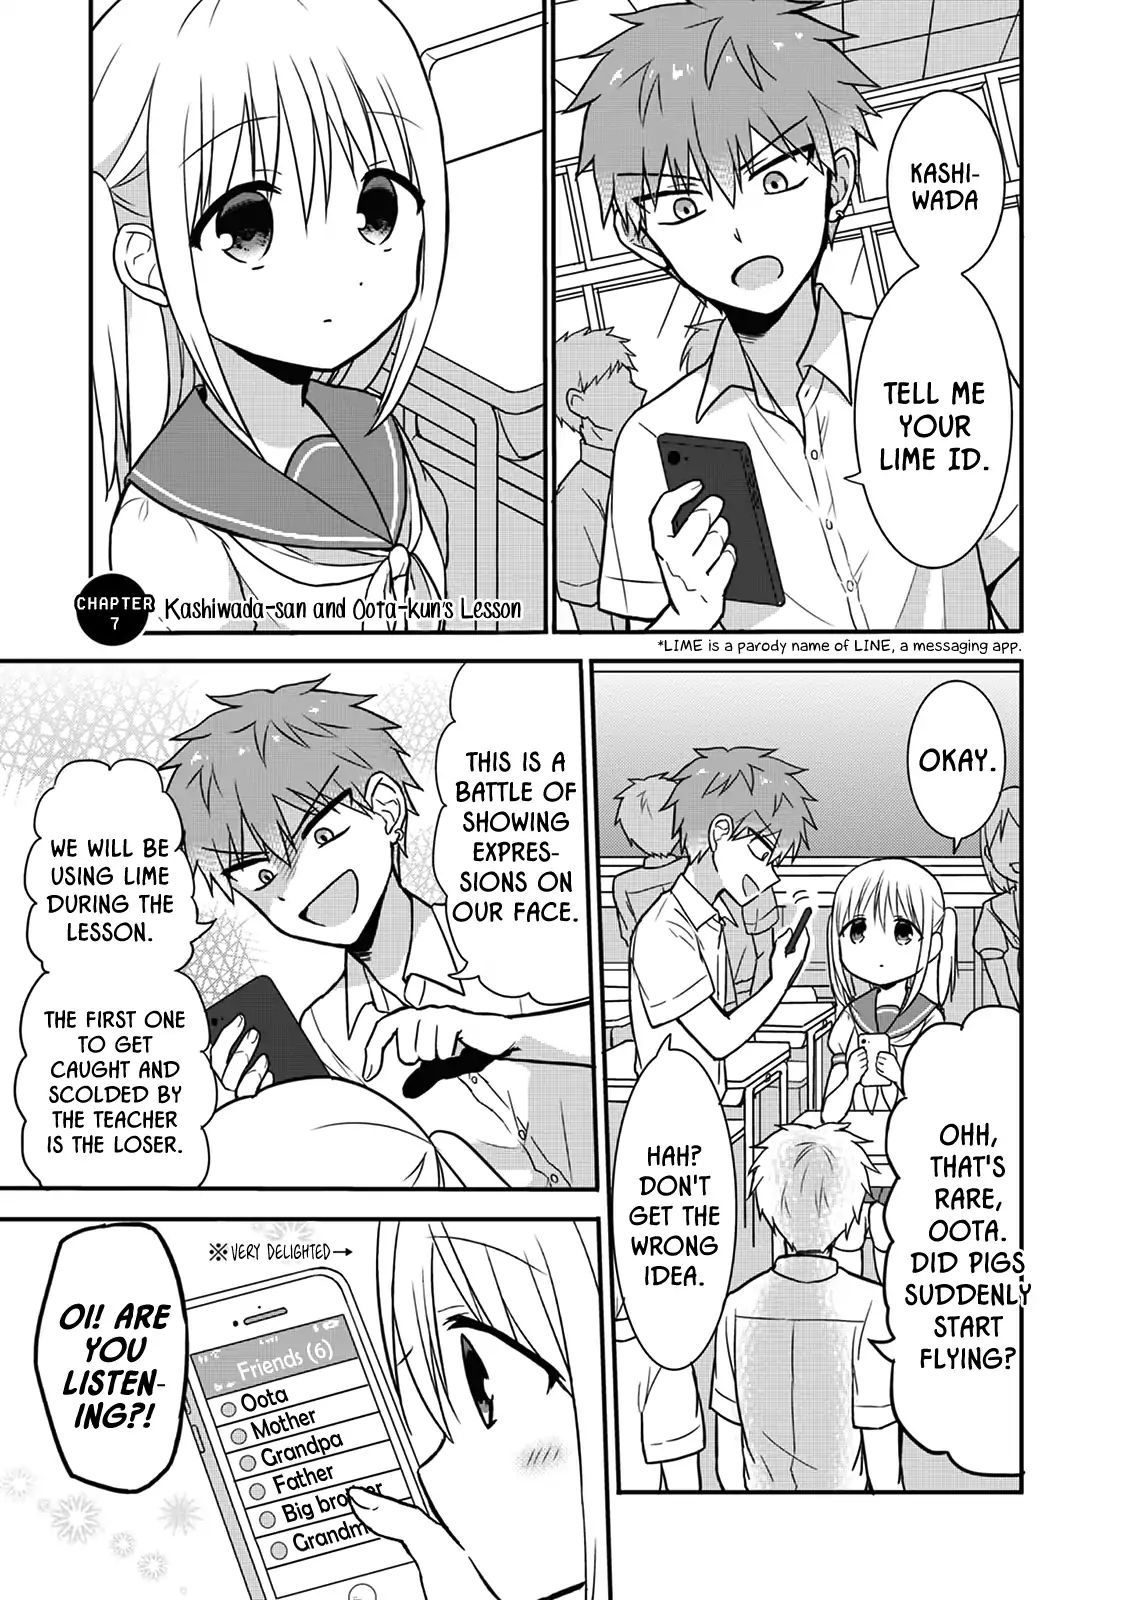 Expressionless Face Girl and Emotional Face Boy Chapter 7: Kashiwada-san and Oota-kun's Lesson